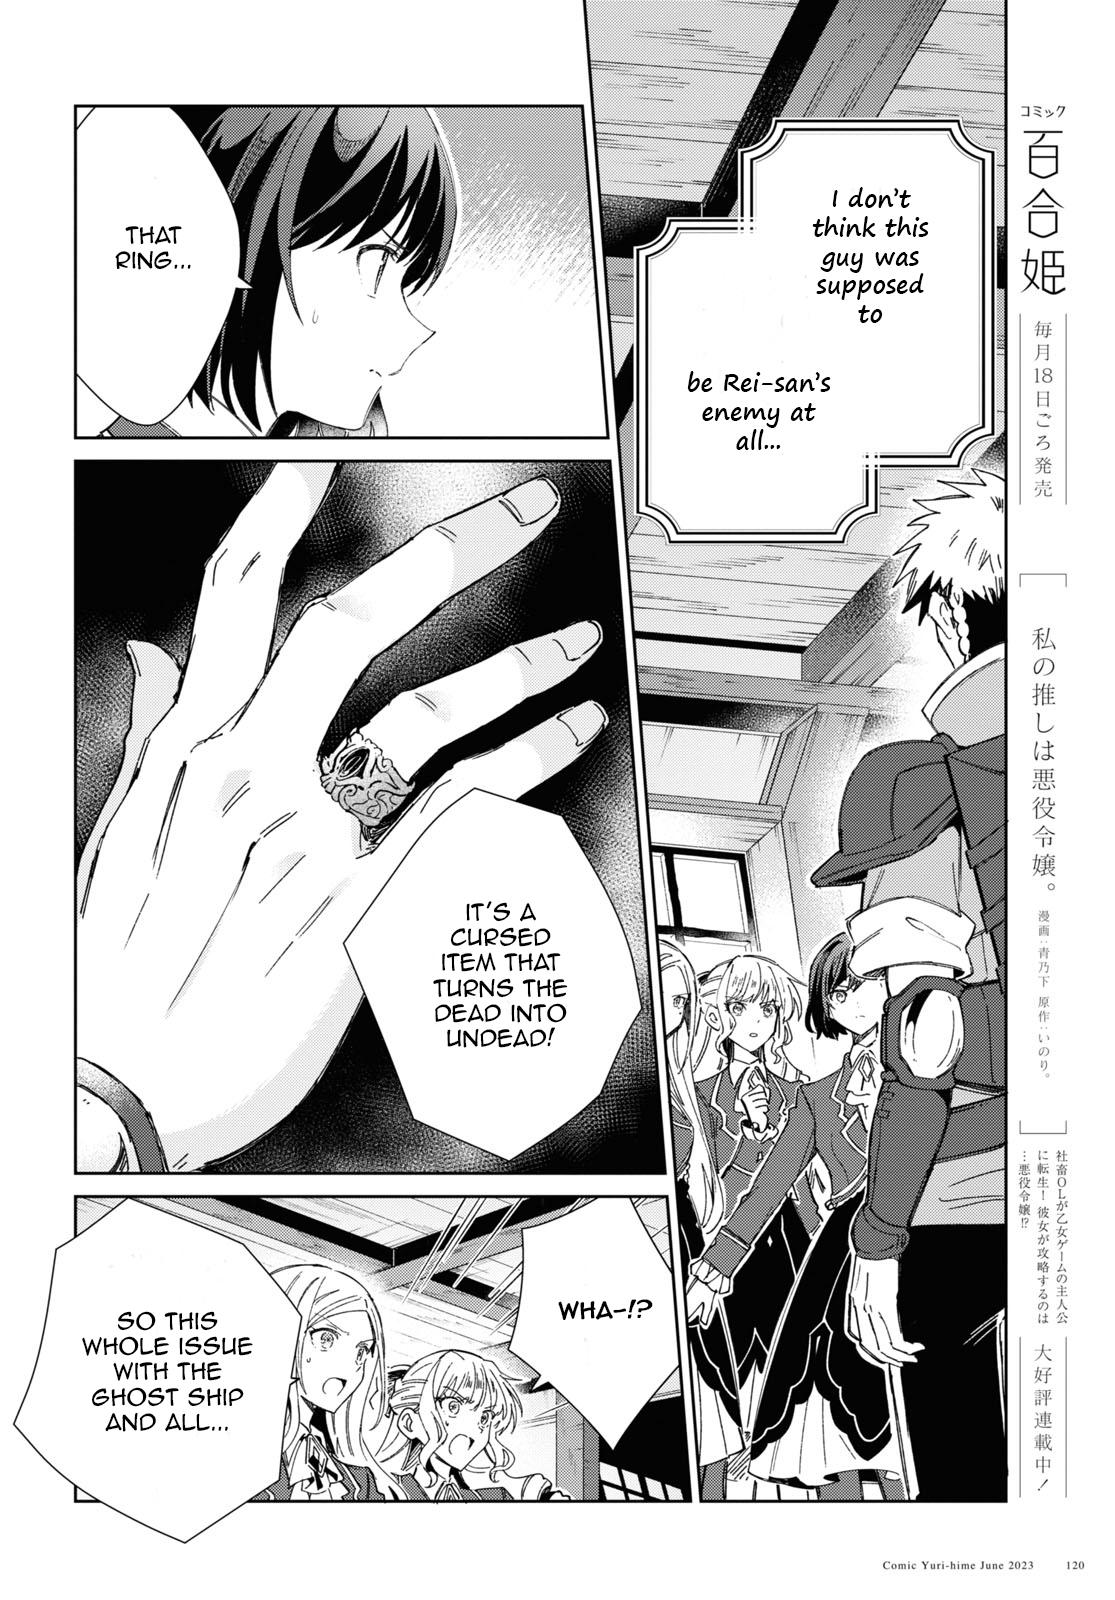 All photos about I Favor The Villainess page 30 - Mangago